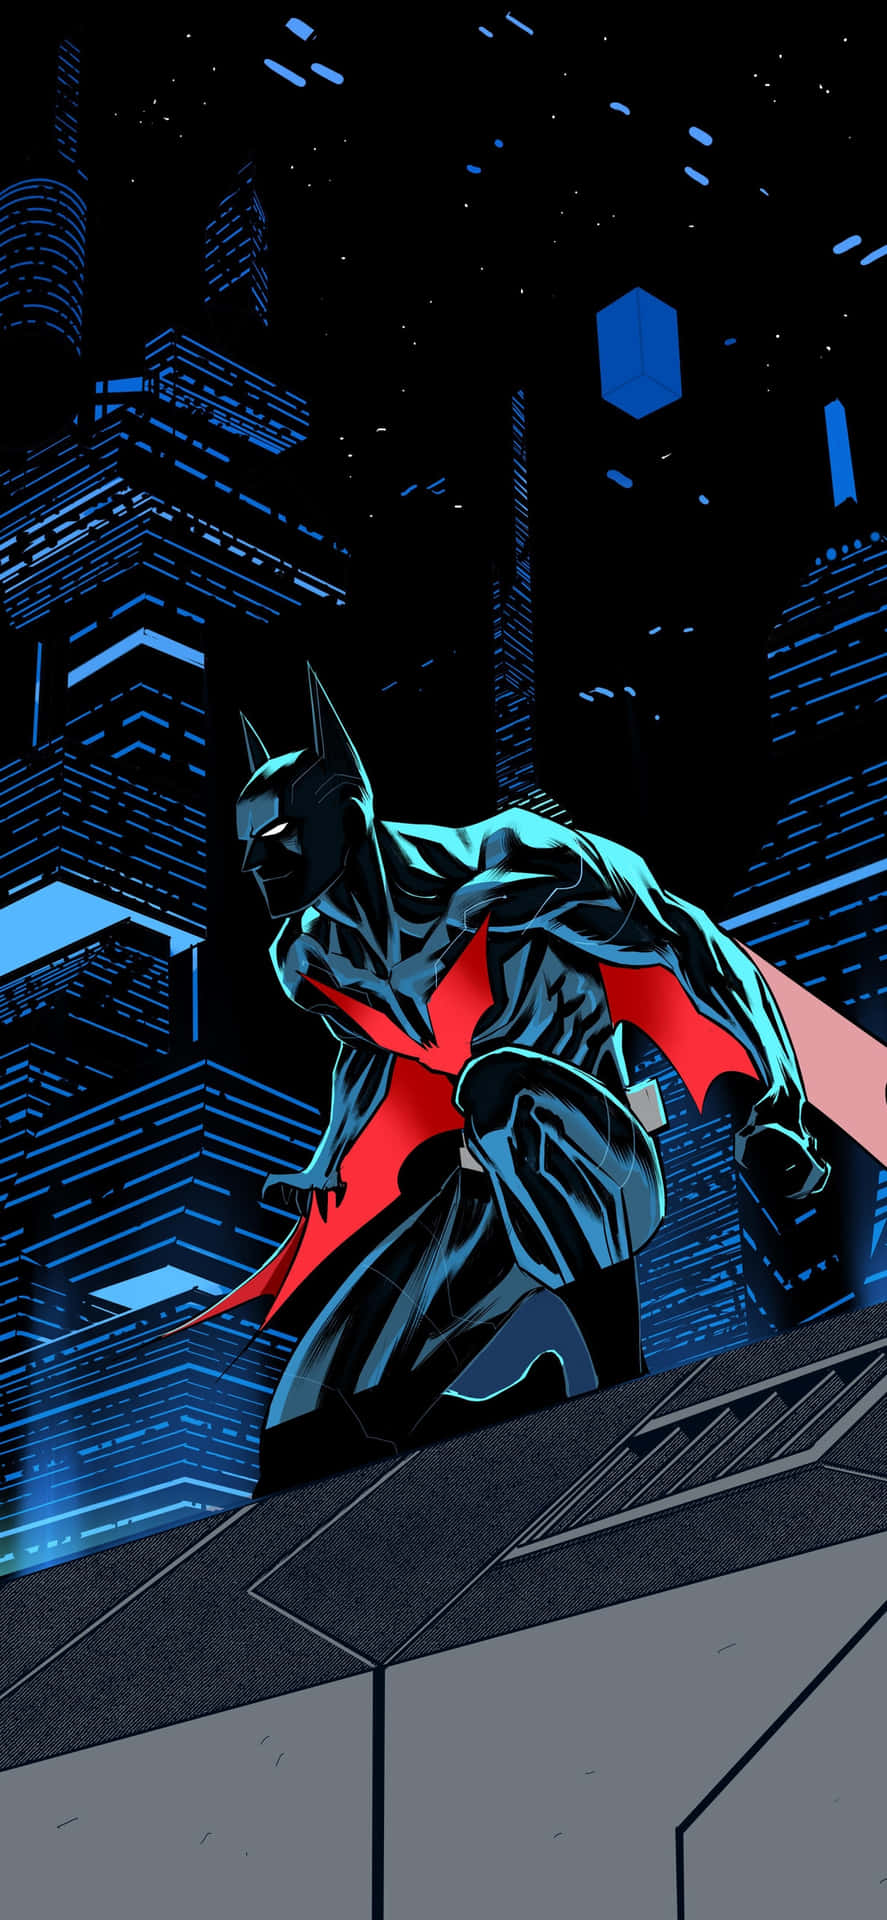 Batman Beyond takes to the night in Gotham City.